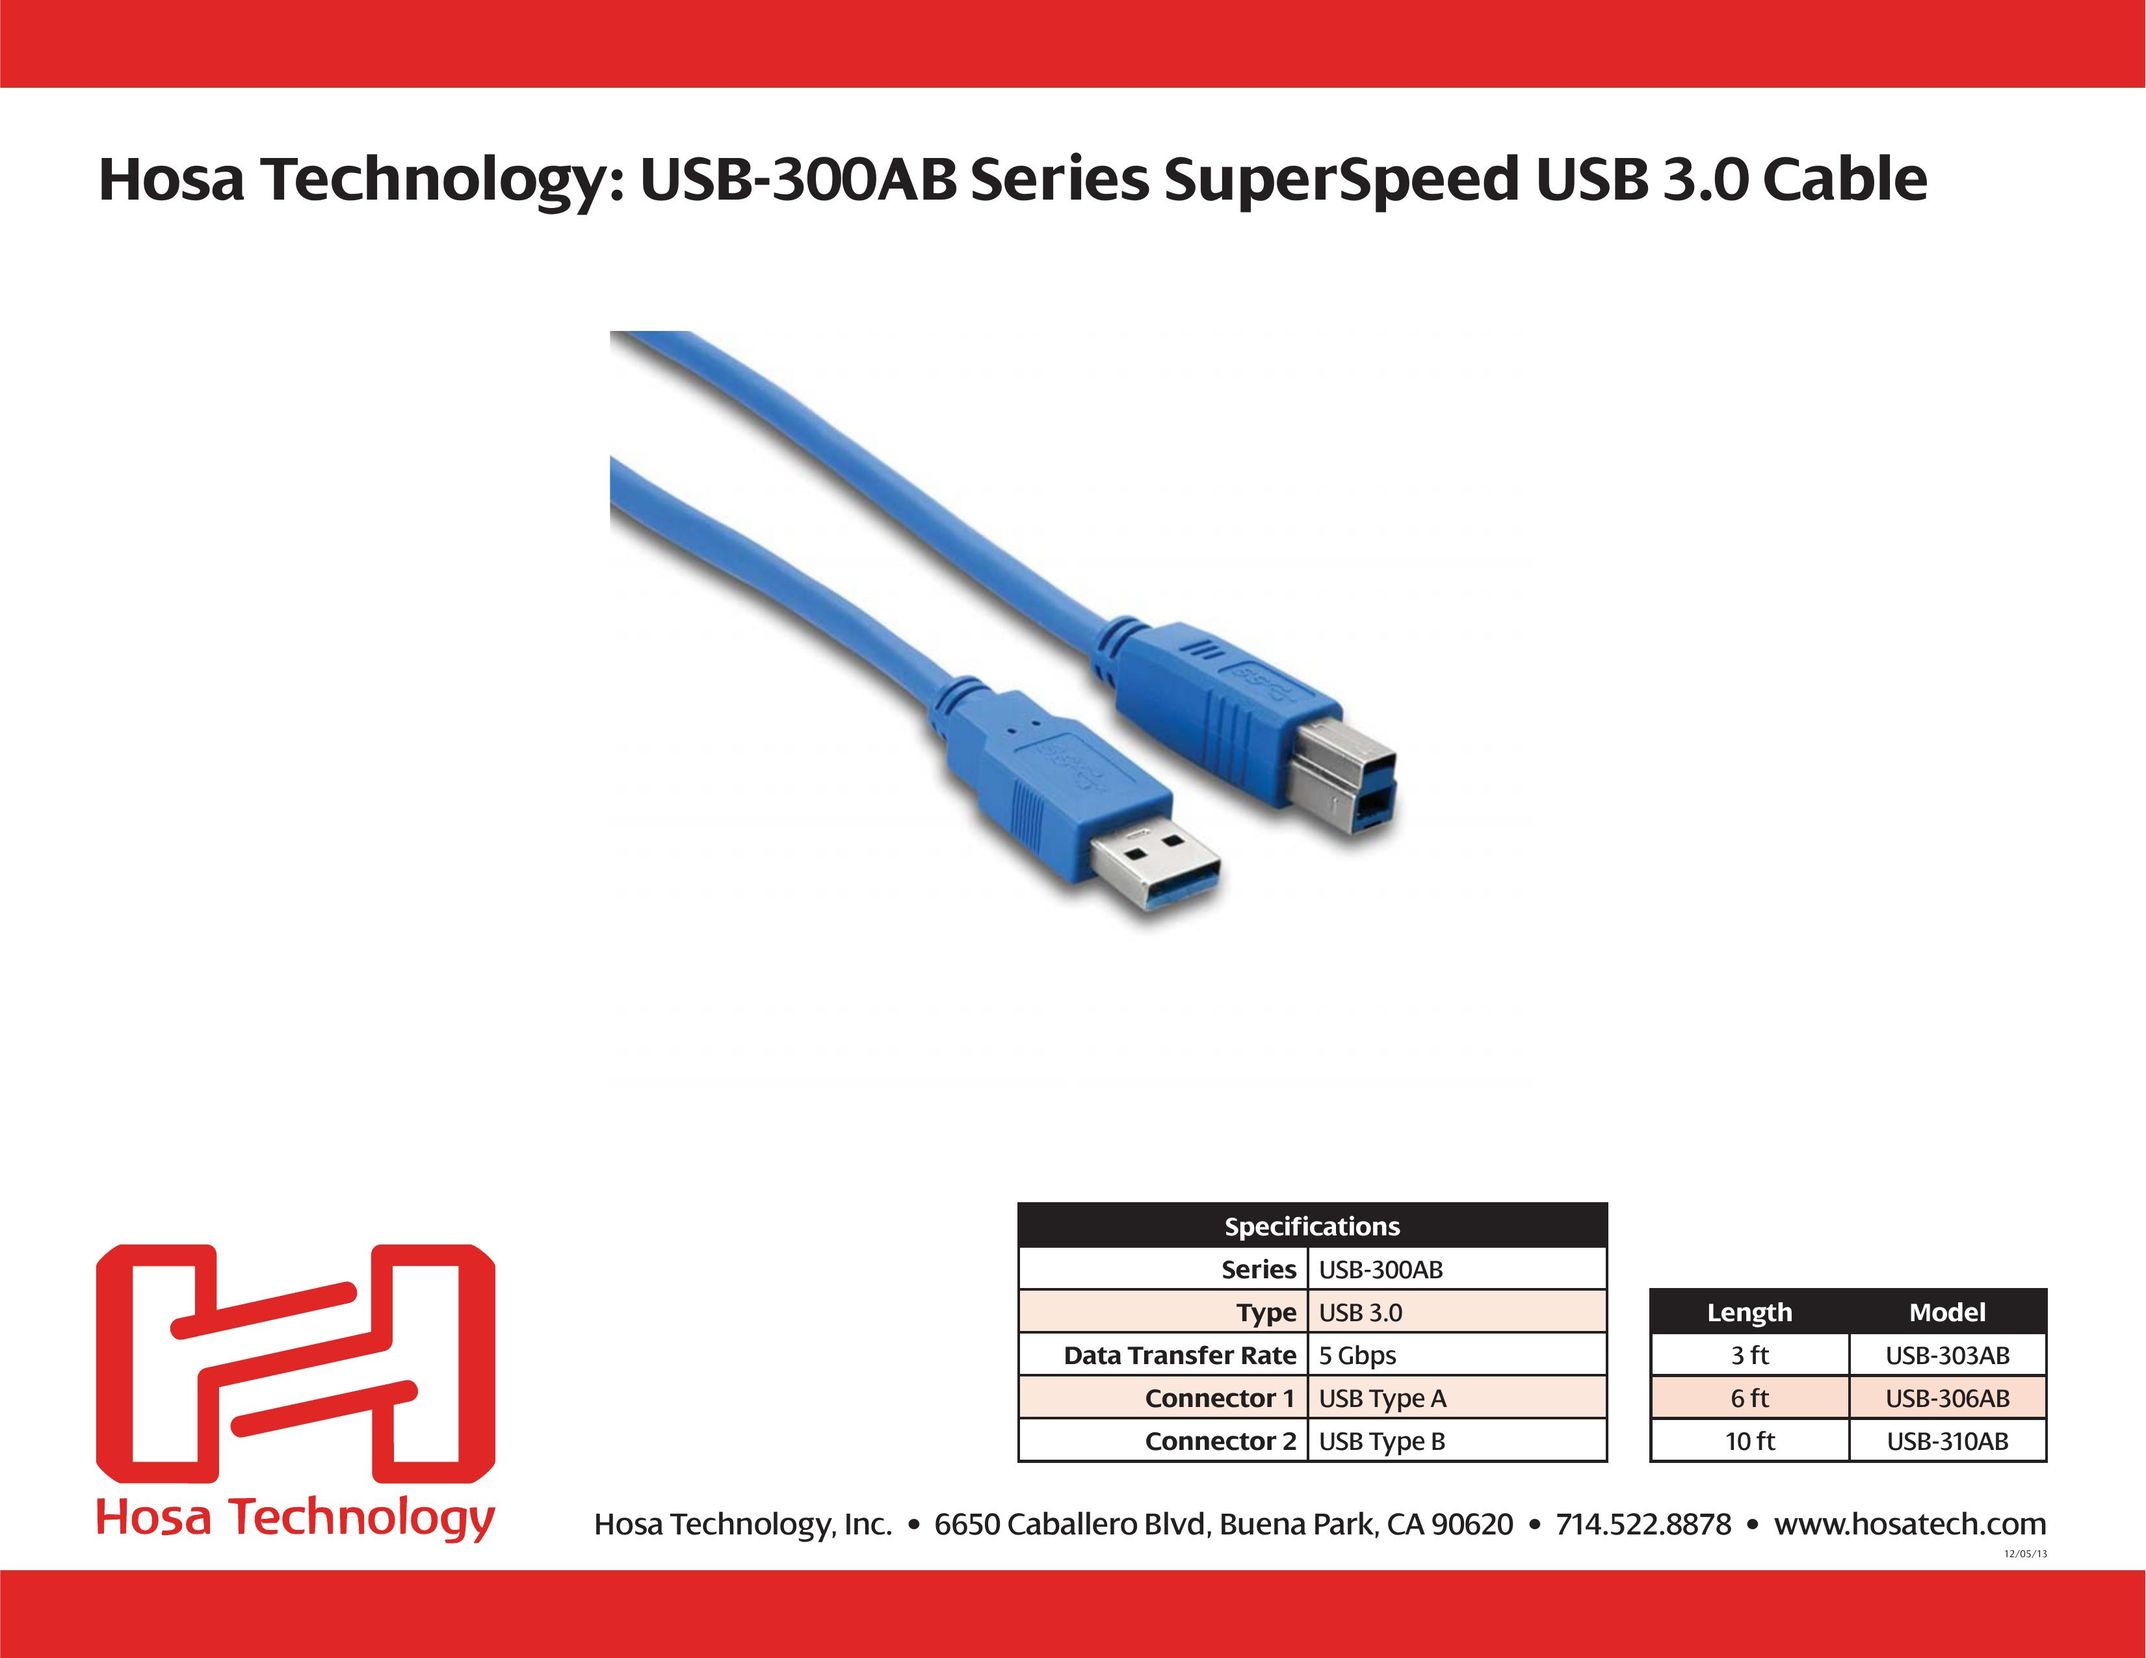 Hosa Technology 10 ft USB-310AB Network Cables User Manual